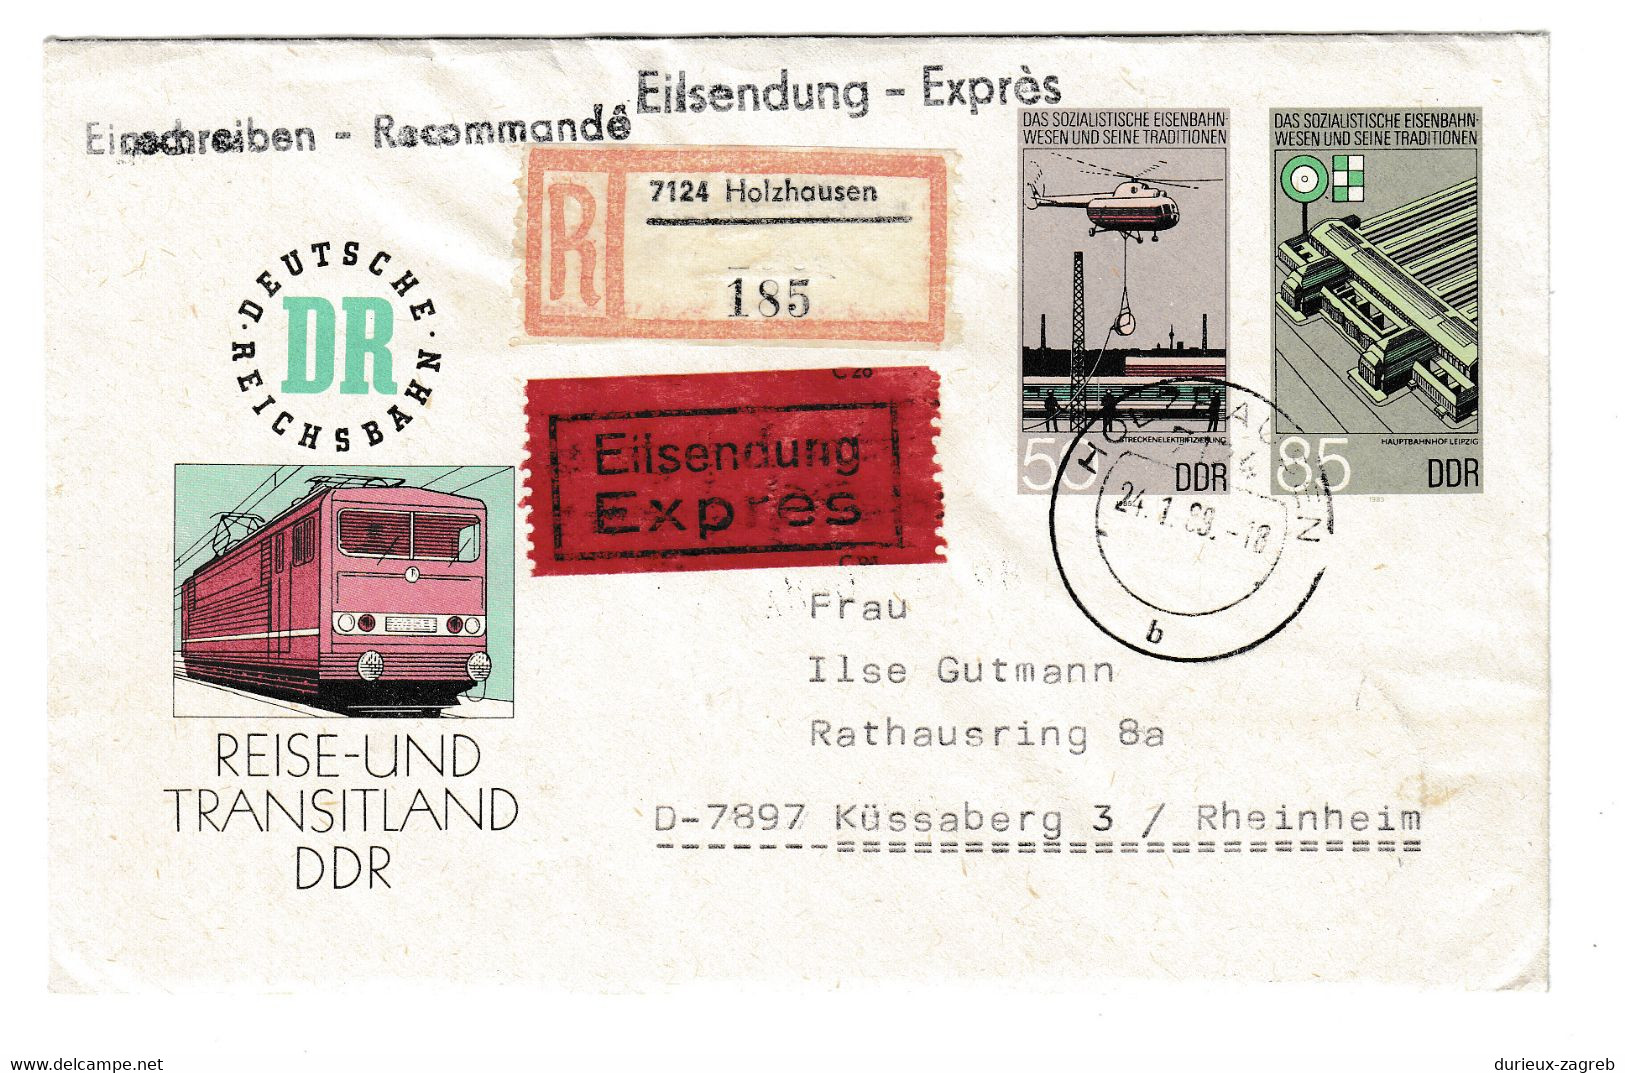 Germany DDR Teise- Und Transitland DDR Illustrated Postal Stationery Letter Cover Posted Registered 1989 Holzhausen - Covers - Used